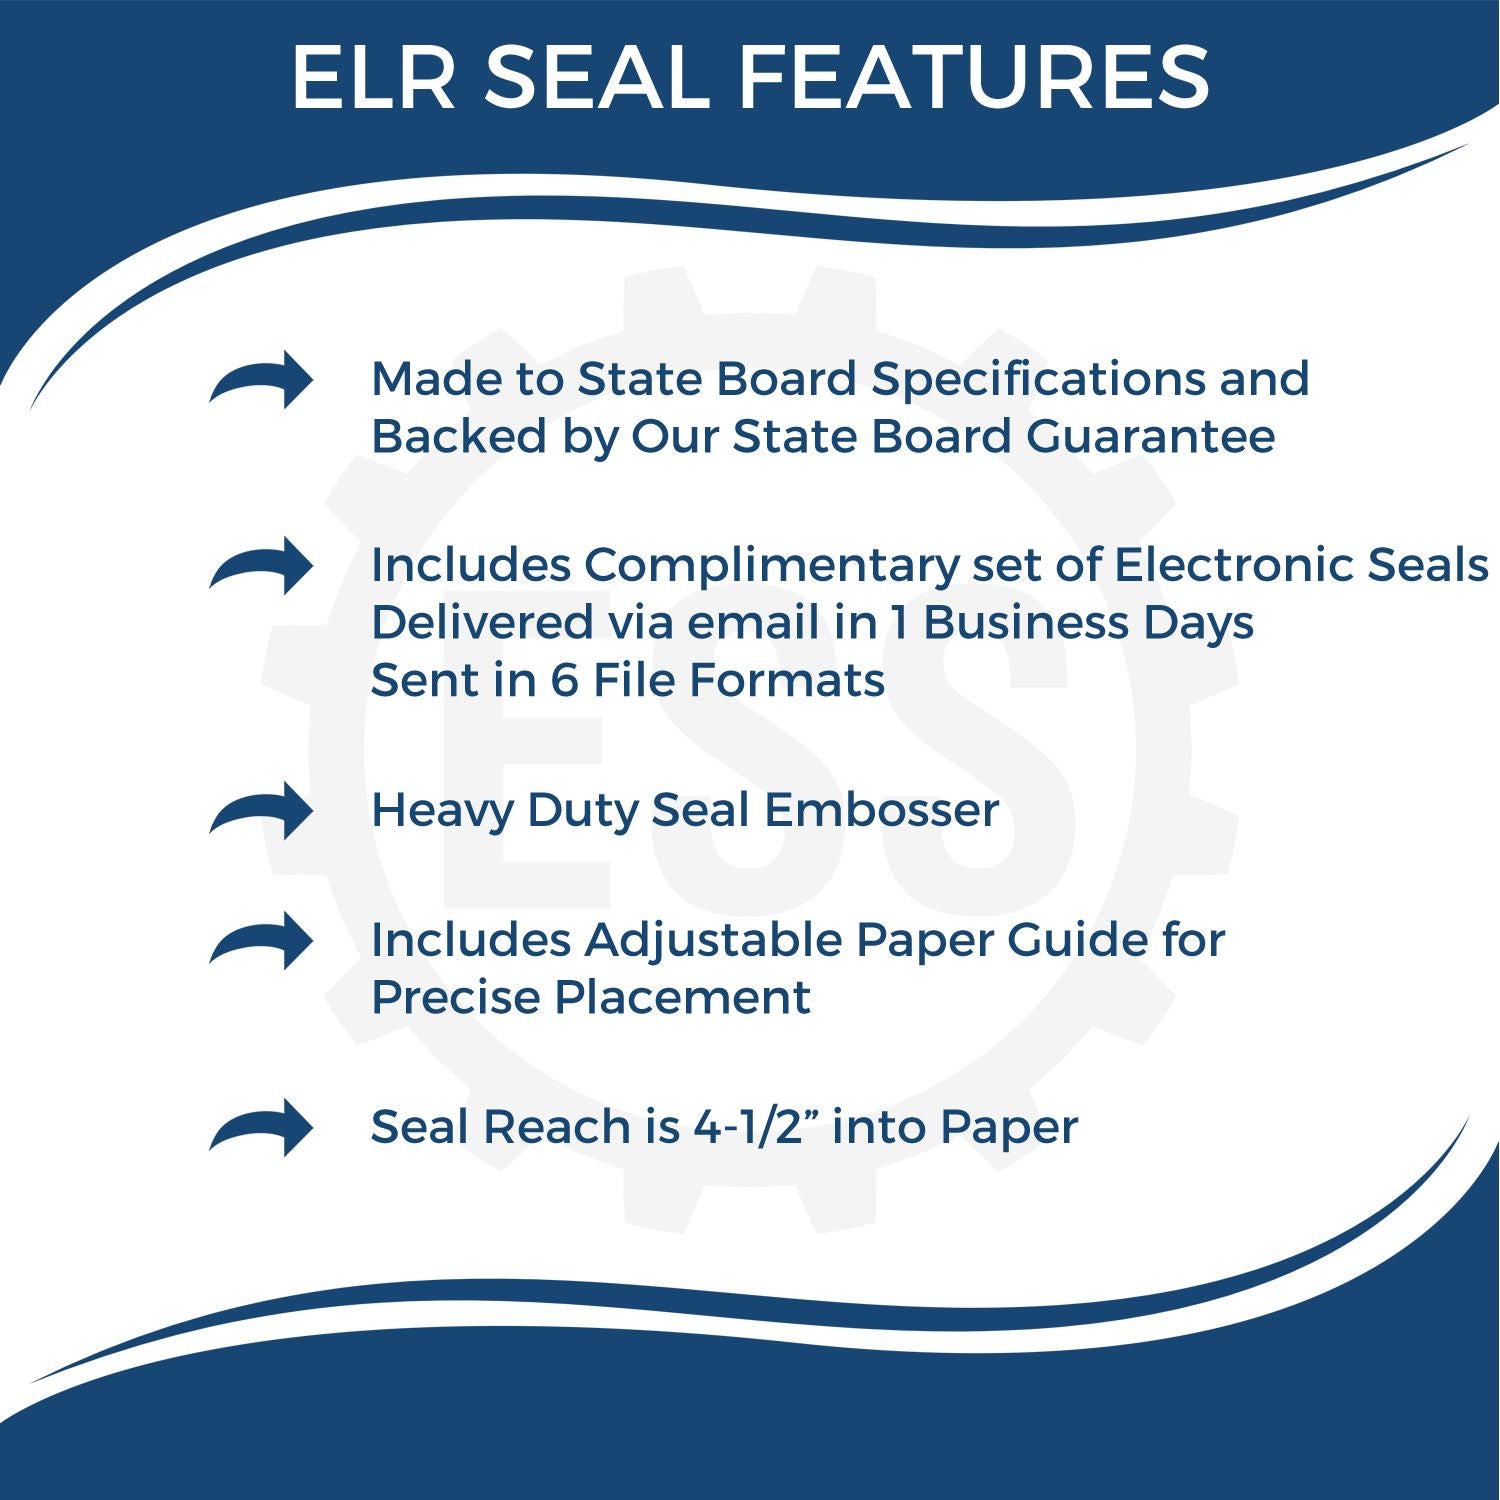 The main image for the State of Maine Extended Long Reach Engineer Seal depicting a sample of the imprint and electronic files